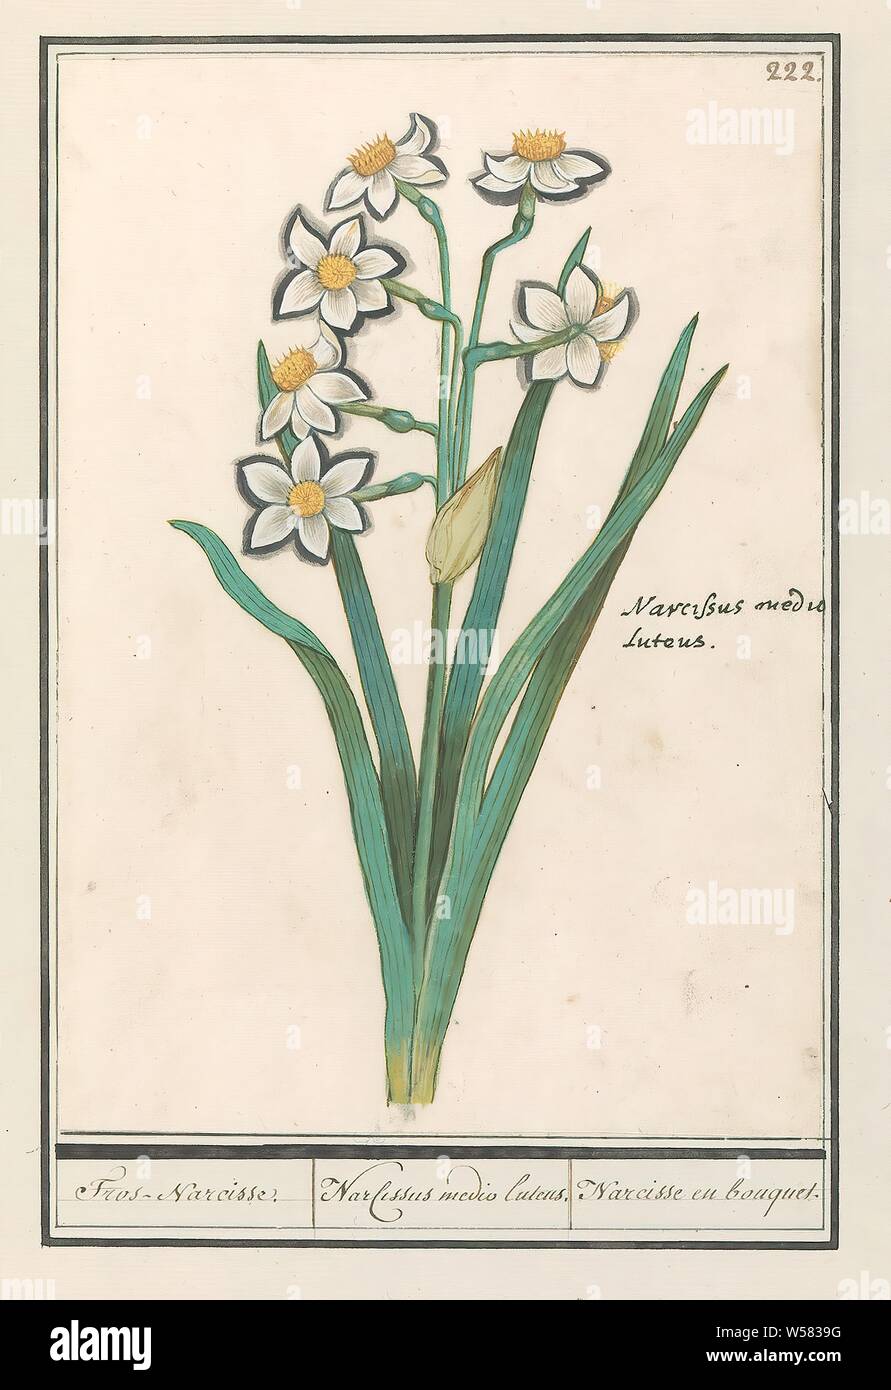 Trosnarcis (Narcissus) Spray narcissus. / Narcissus mid-lutens. / Narcisse  and bouquet. (title on object), Trosnarcis. Numbered top right: 222. Right  the Latin name. Part of the third album with drawings of flowers